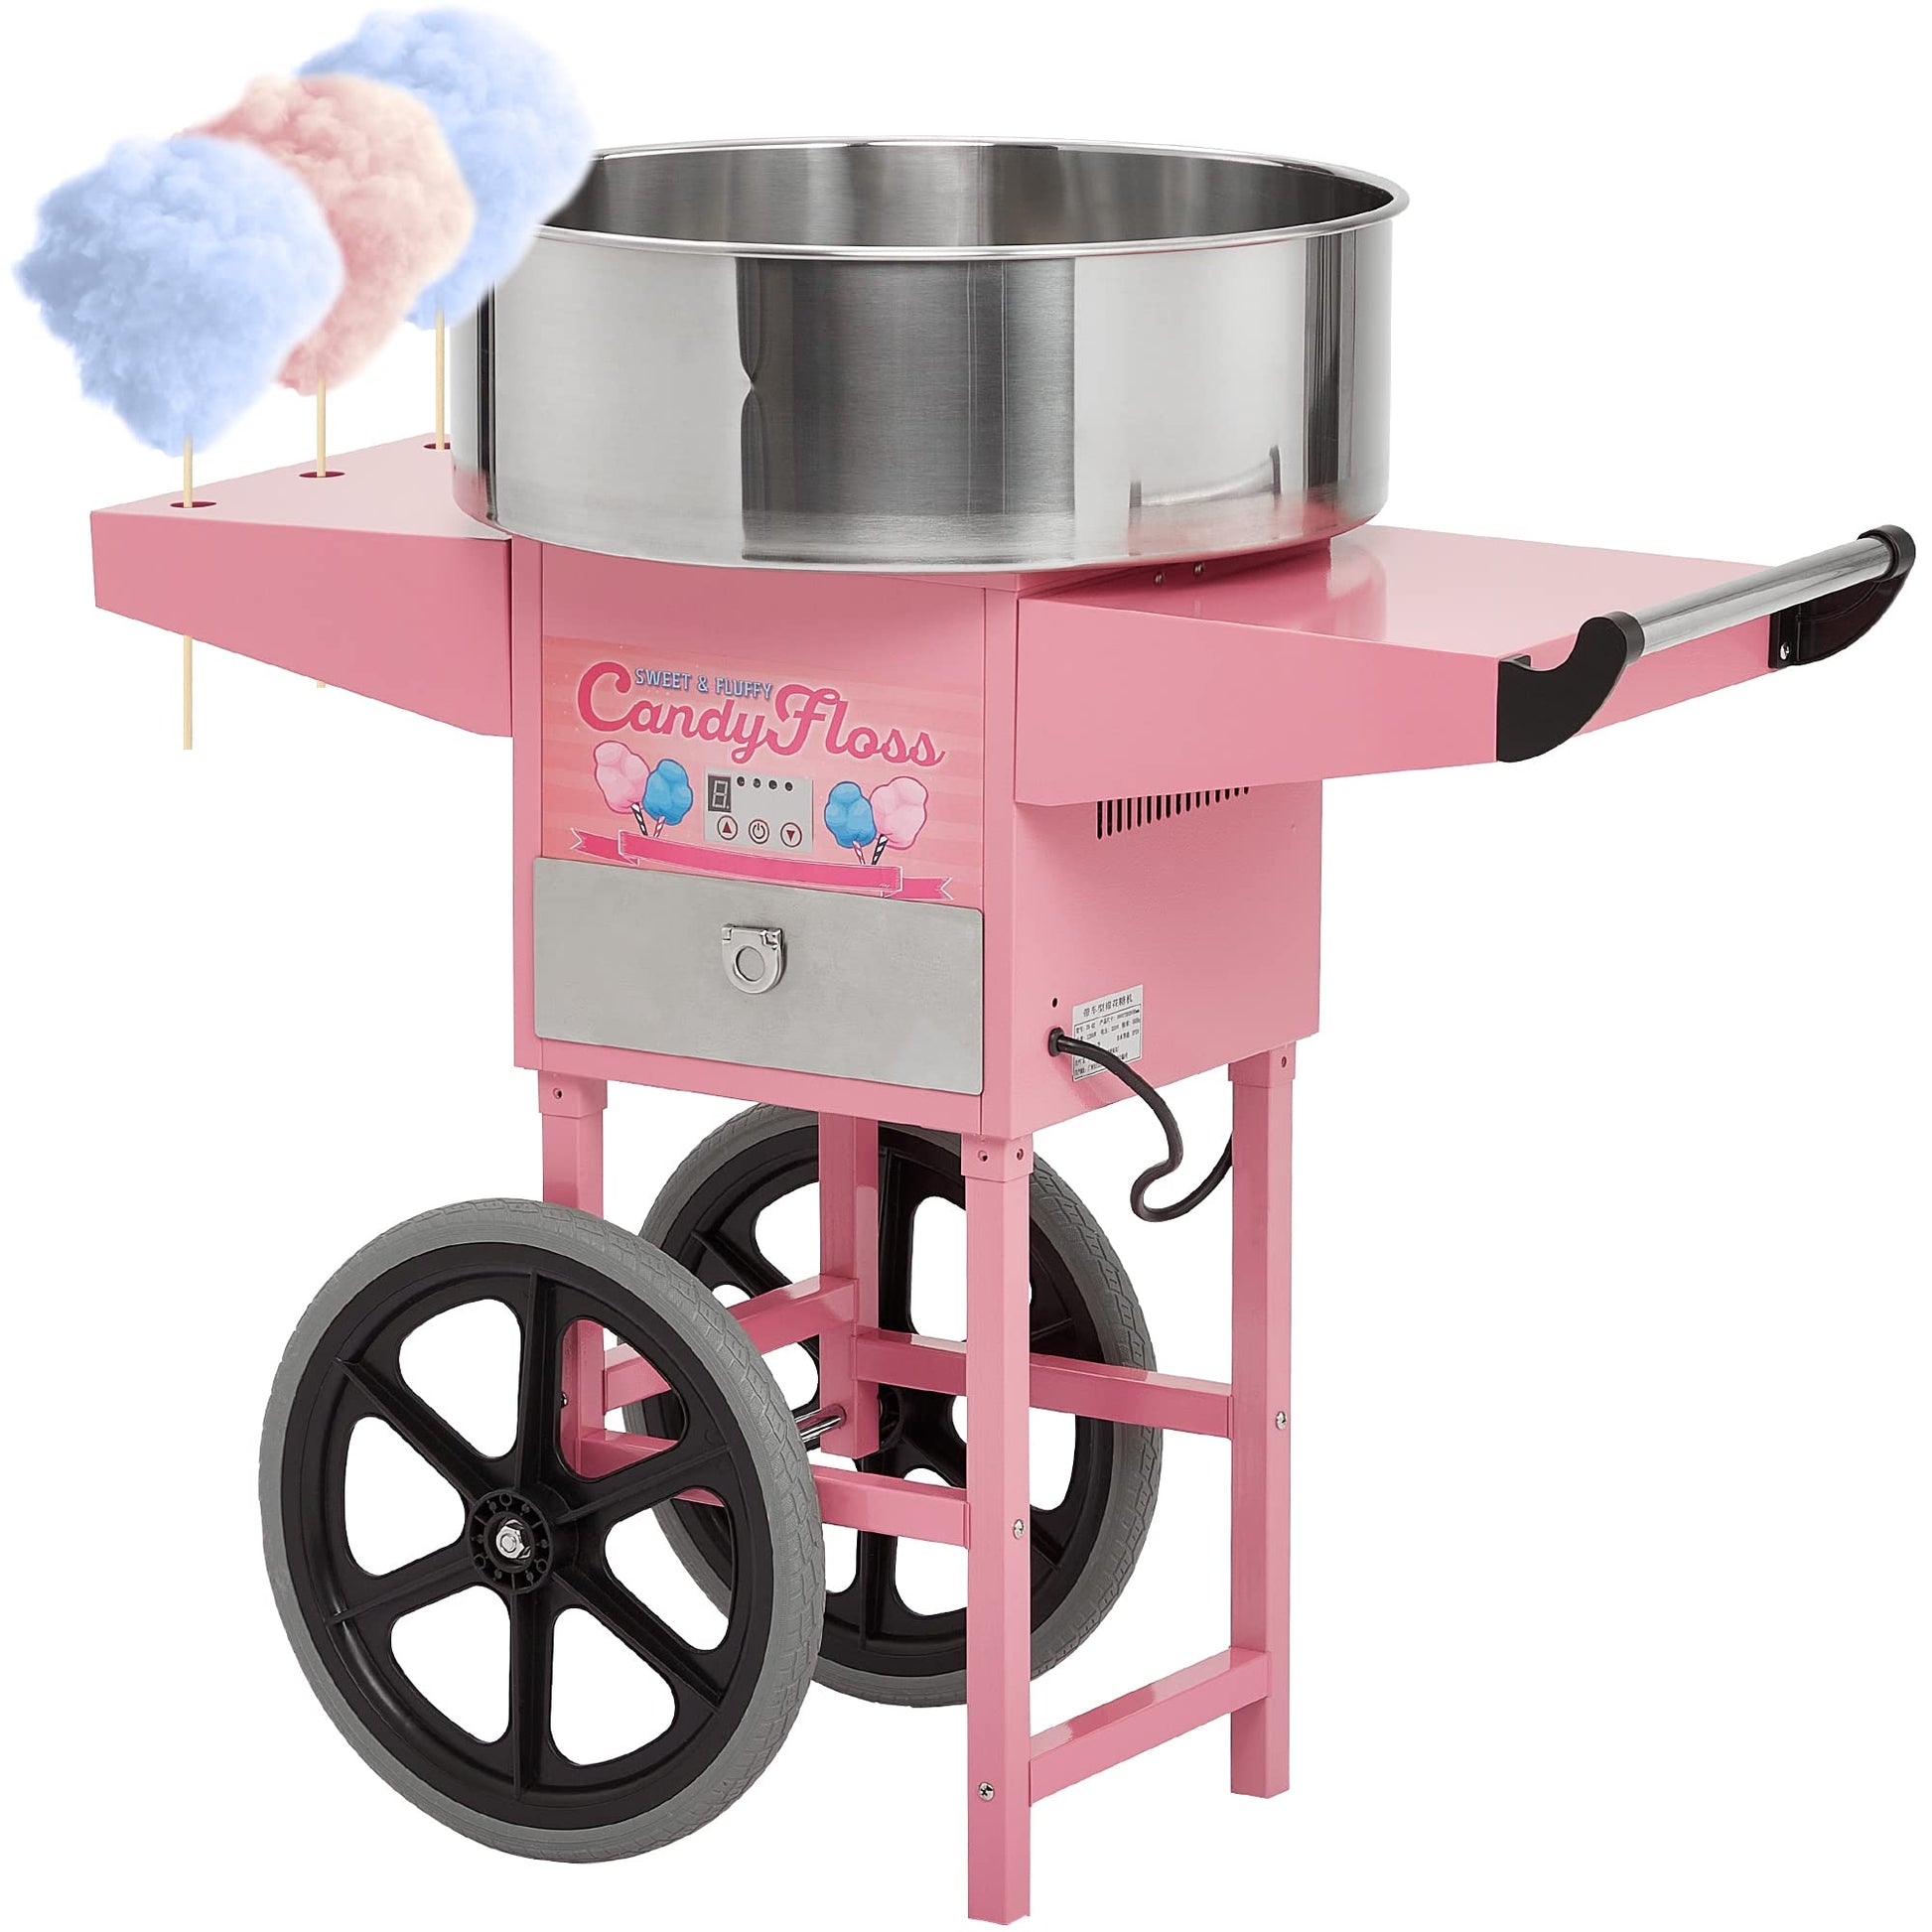 GARVEE Cotton Candy Machine With Cart Electric Cotton Candy Maker With 20 inch Stainless Steel Bowl